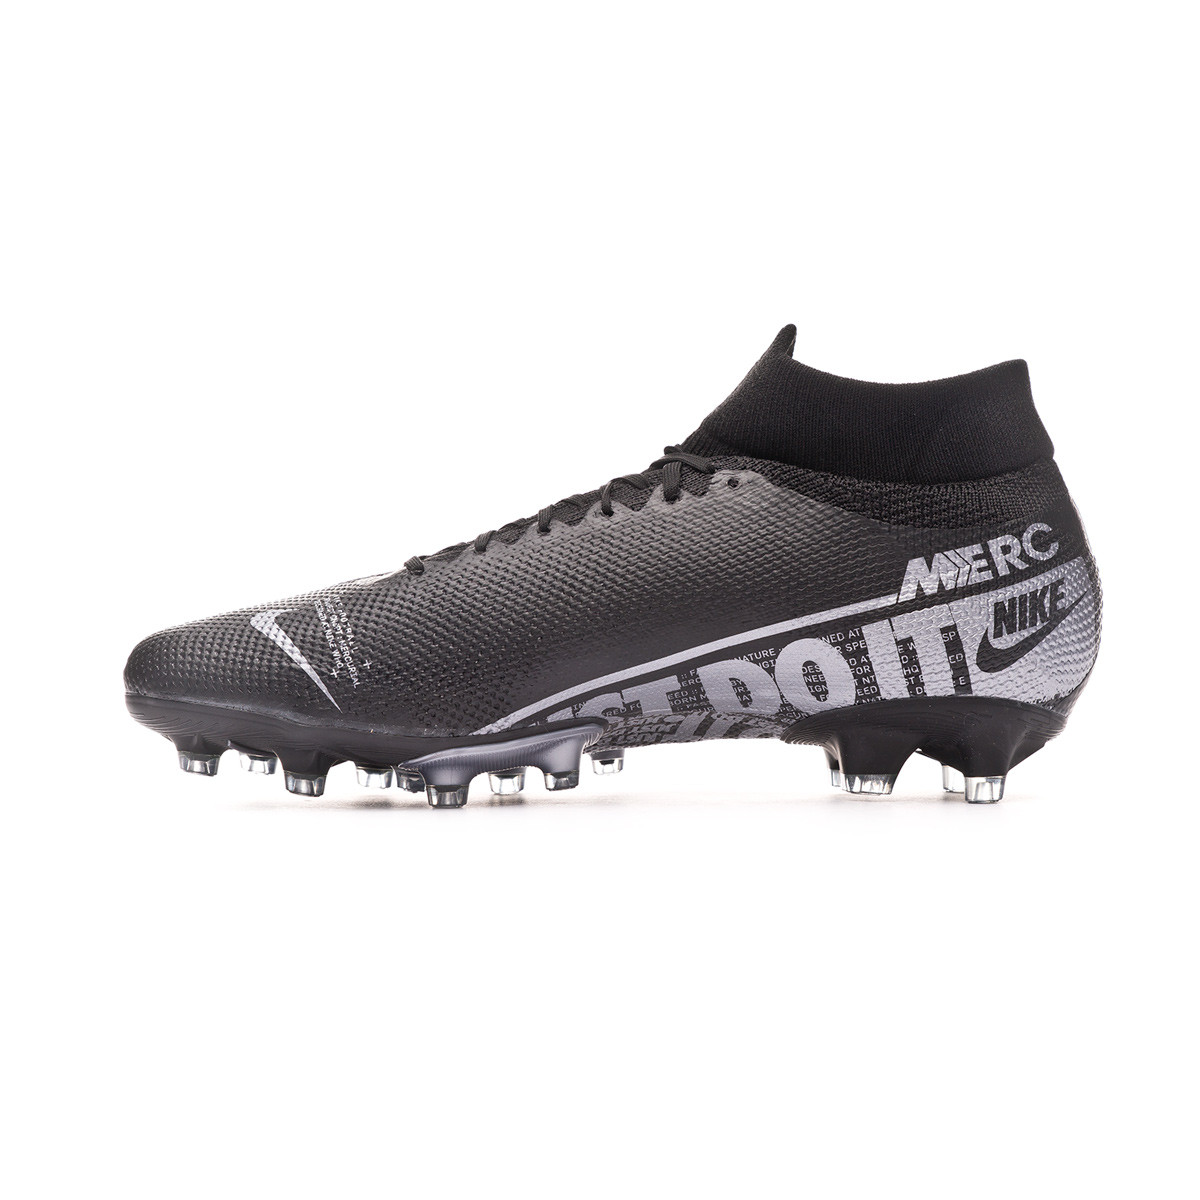 Nike Superfly 6 Pro AG Pro Artificial Grass Pro Football Boot.